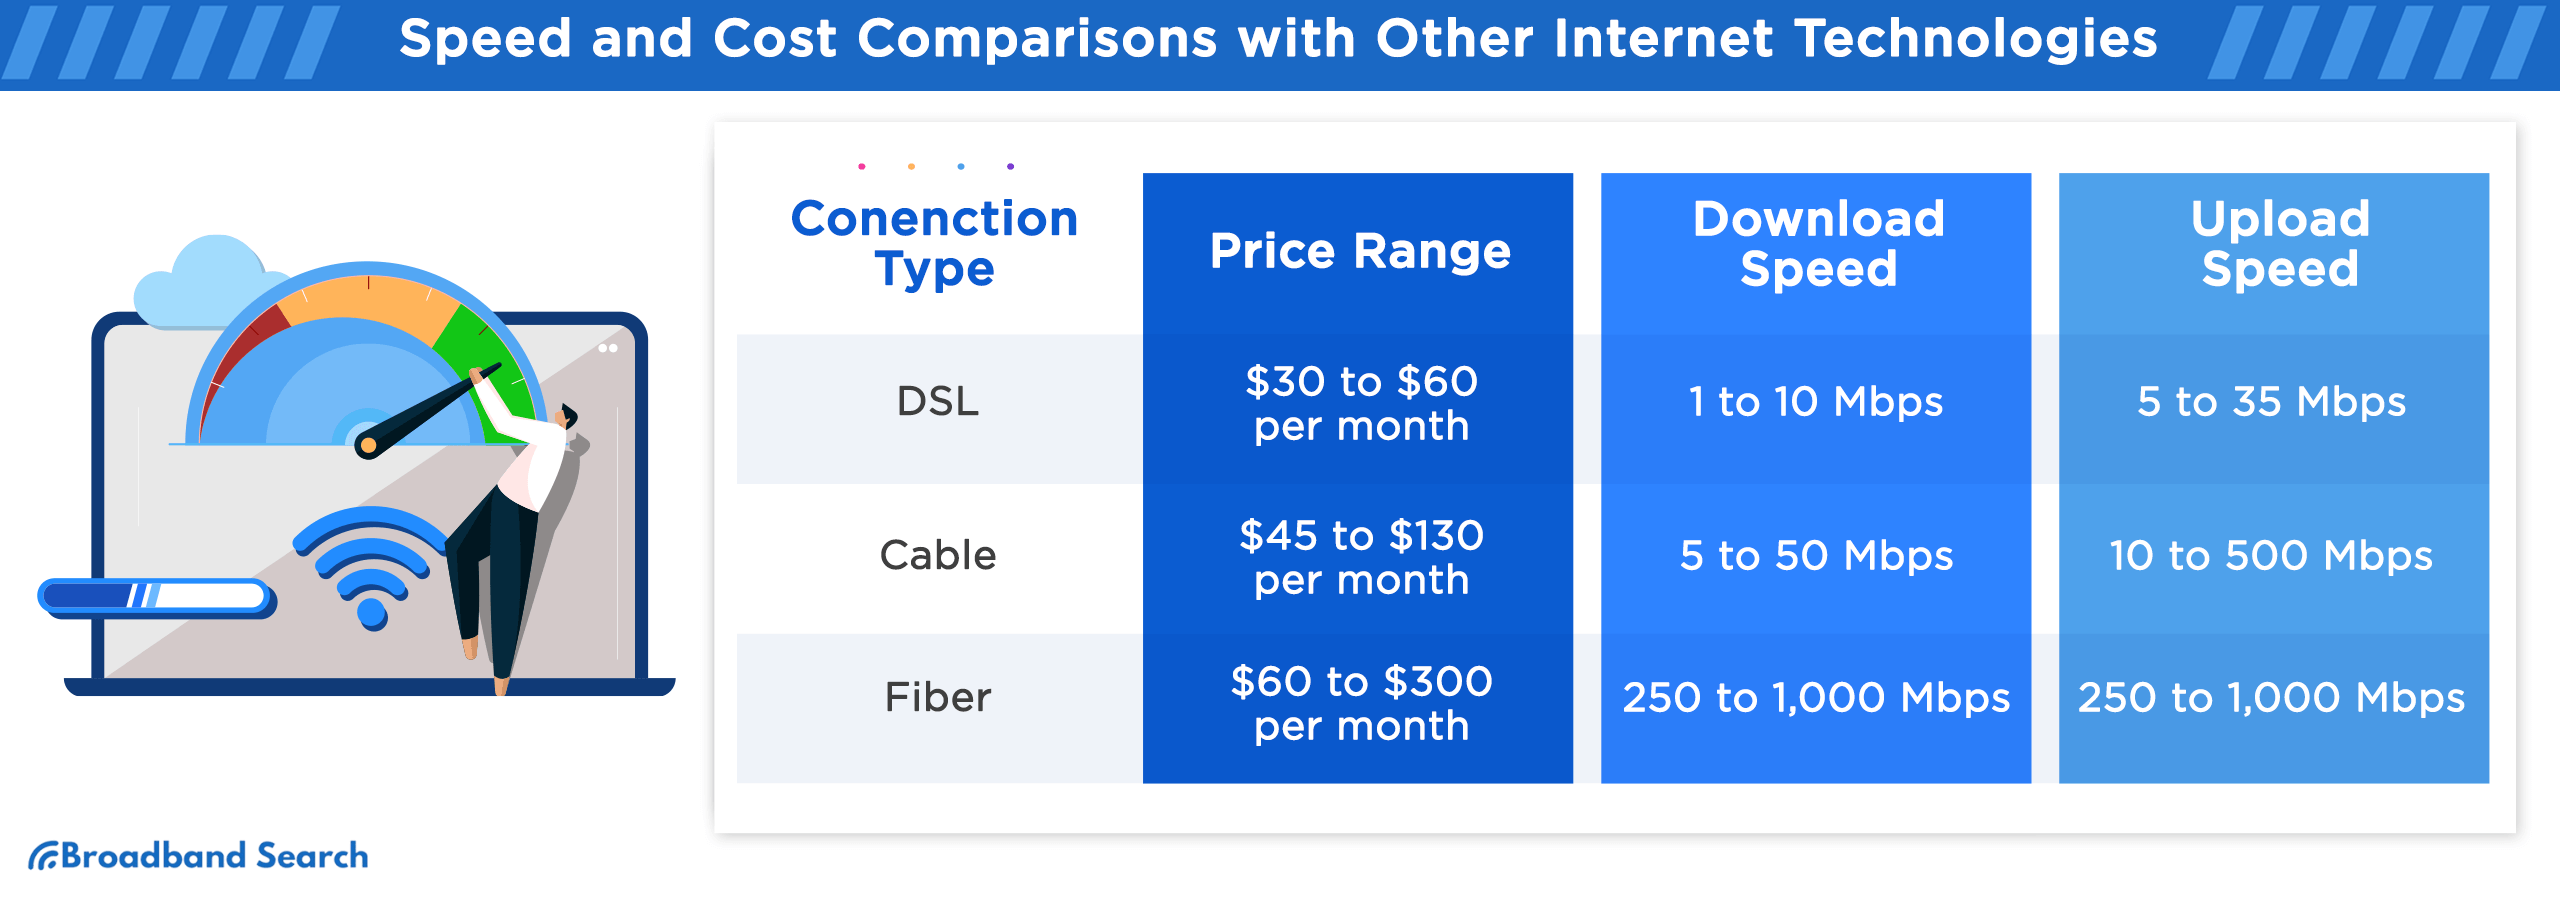 Speed and cost comparisons with other internet technologies